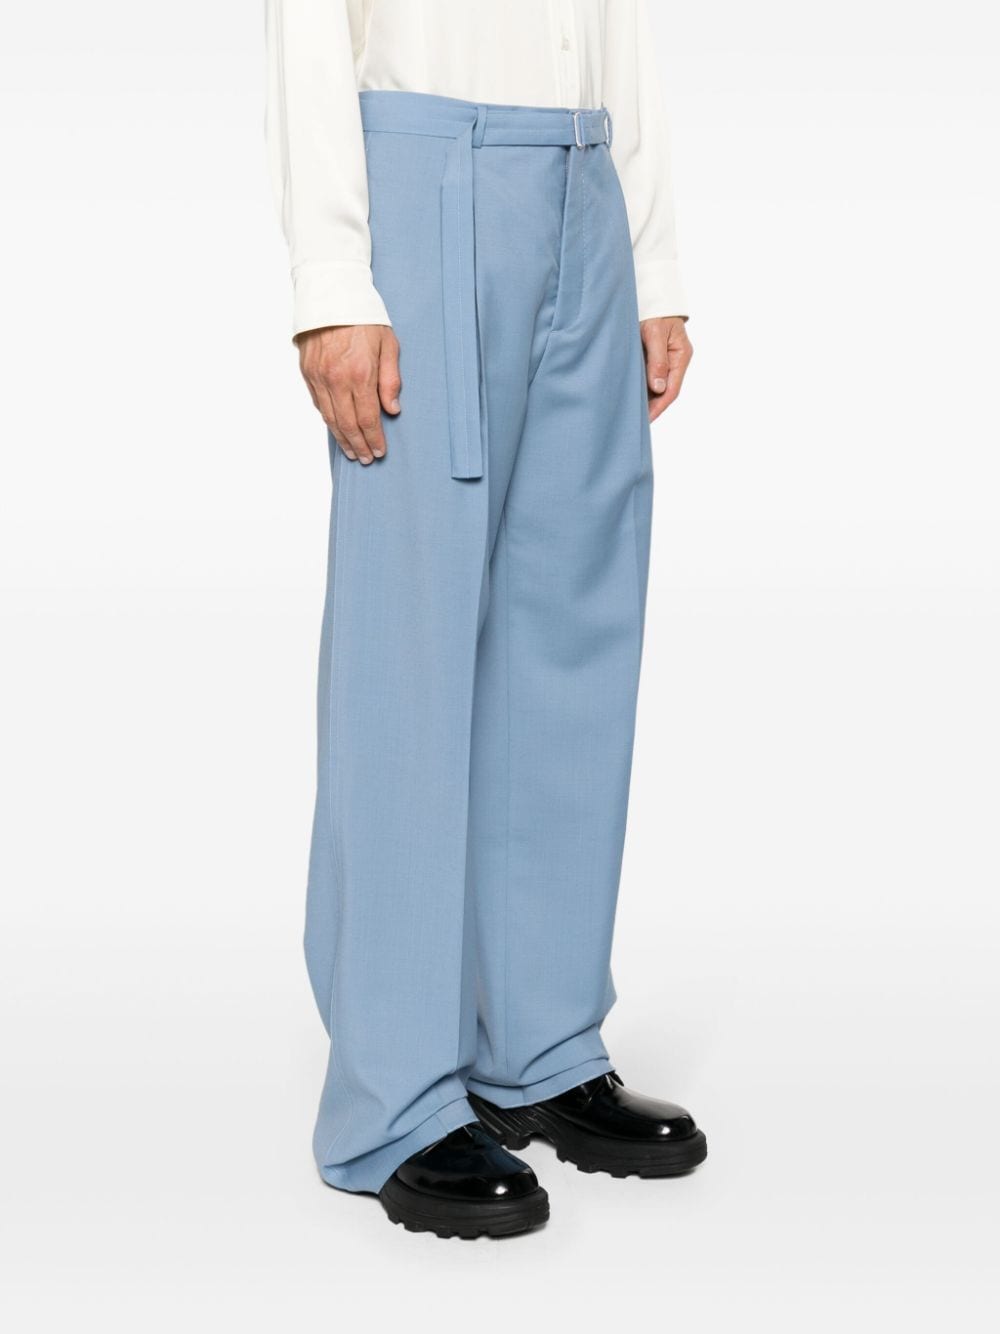 Tailored design trousers